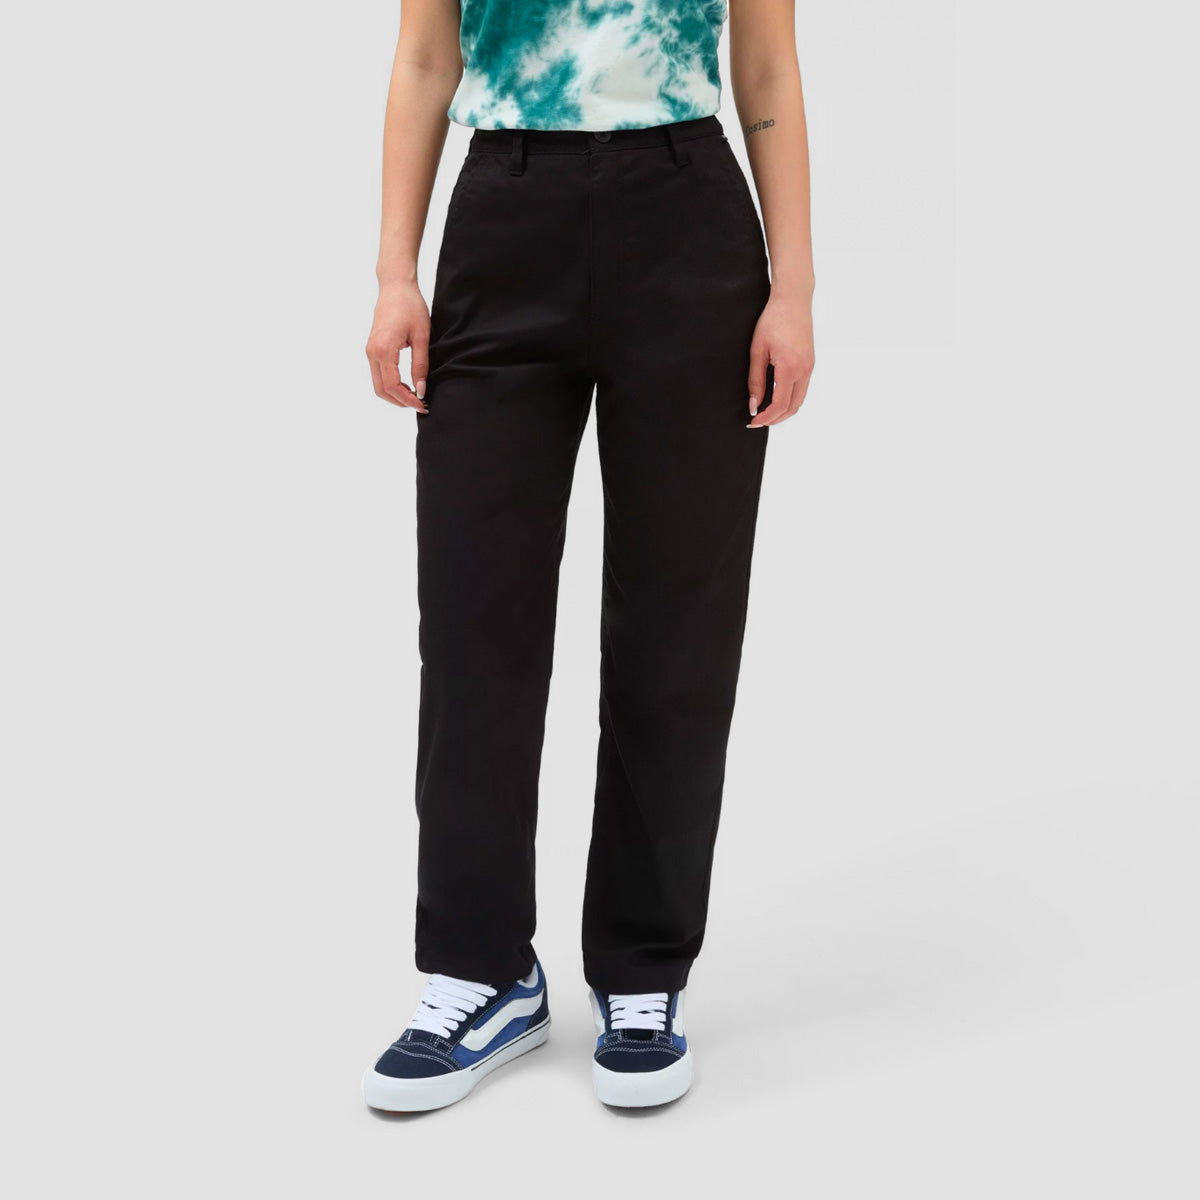 Vans Relaxed Authentic Chino Pants Black - Womens